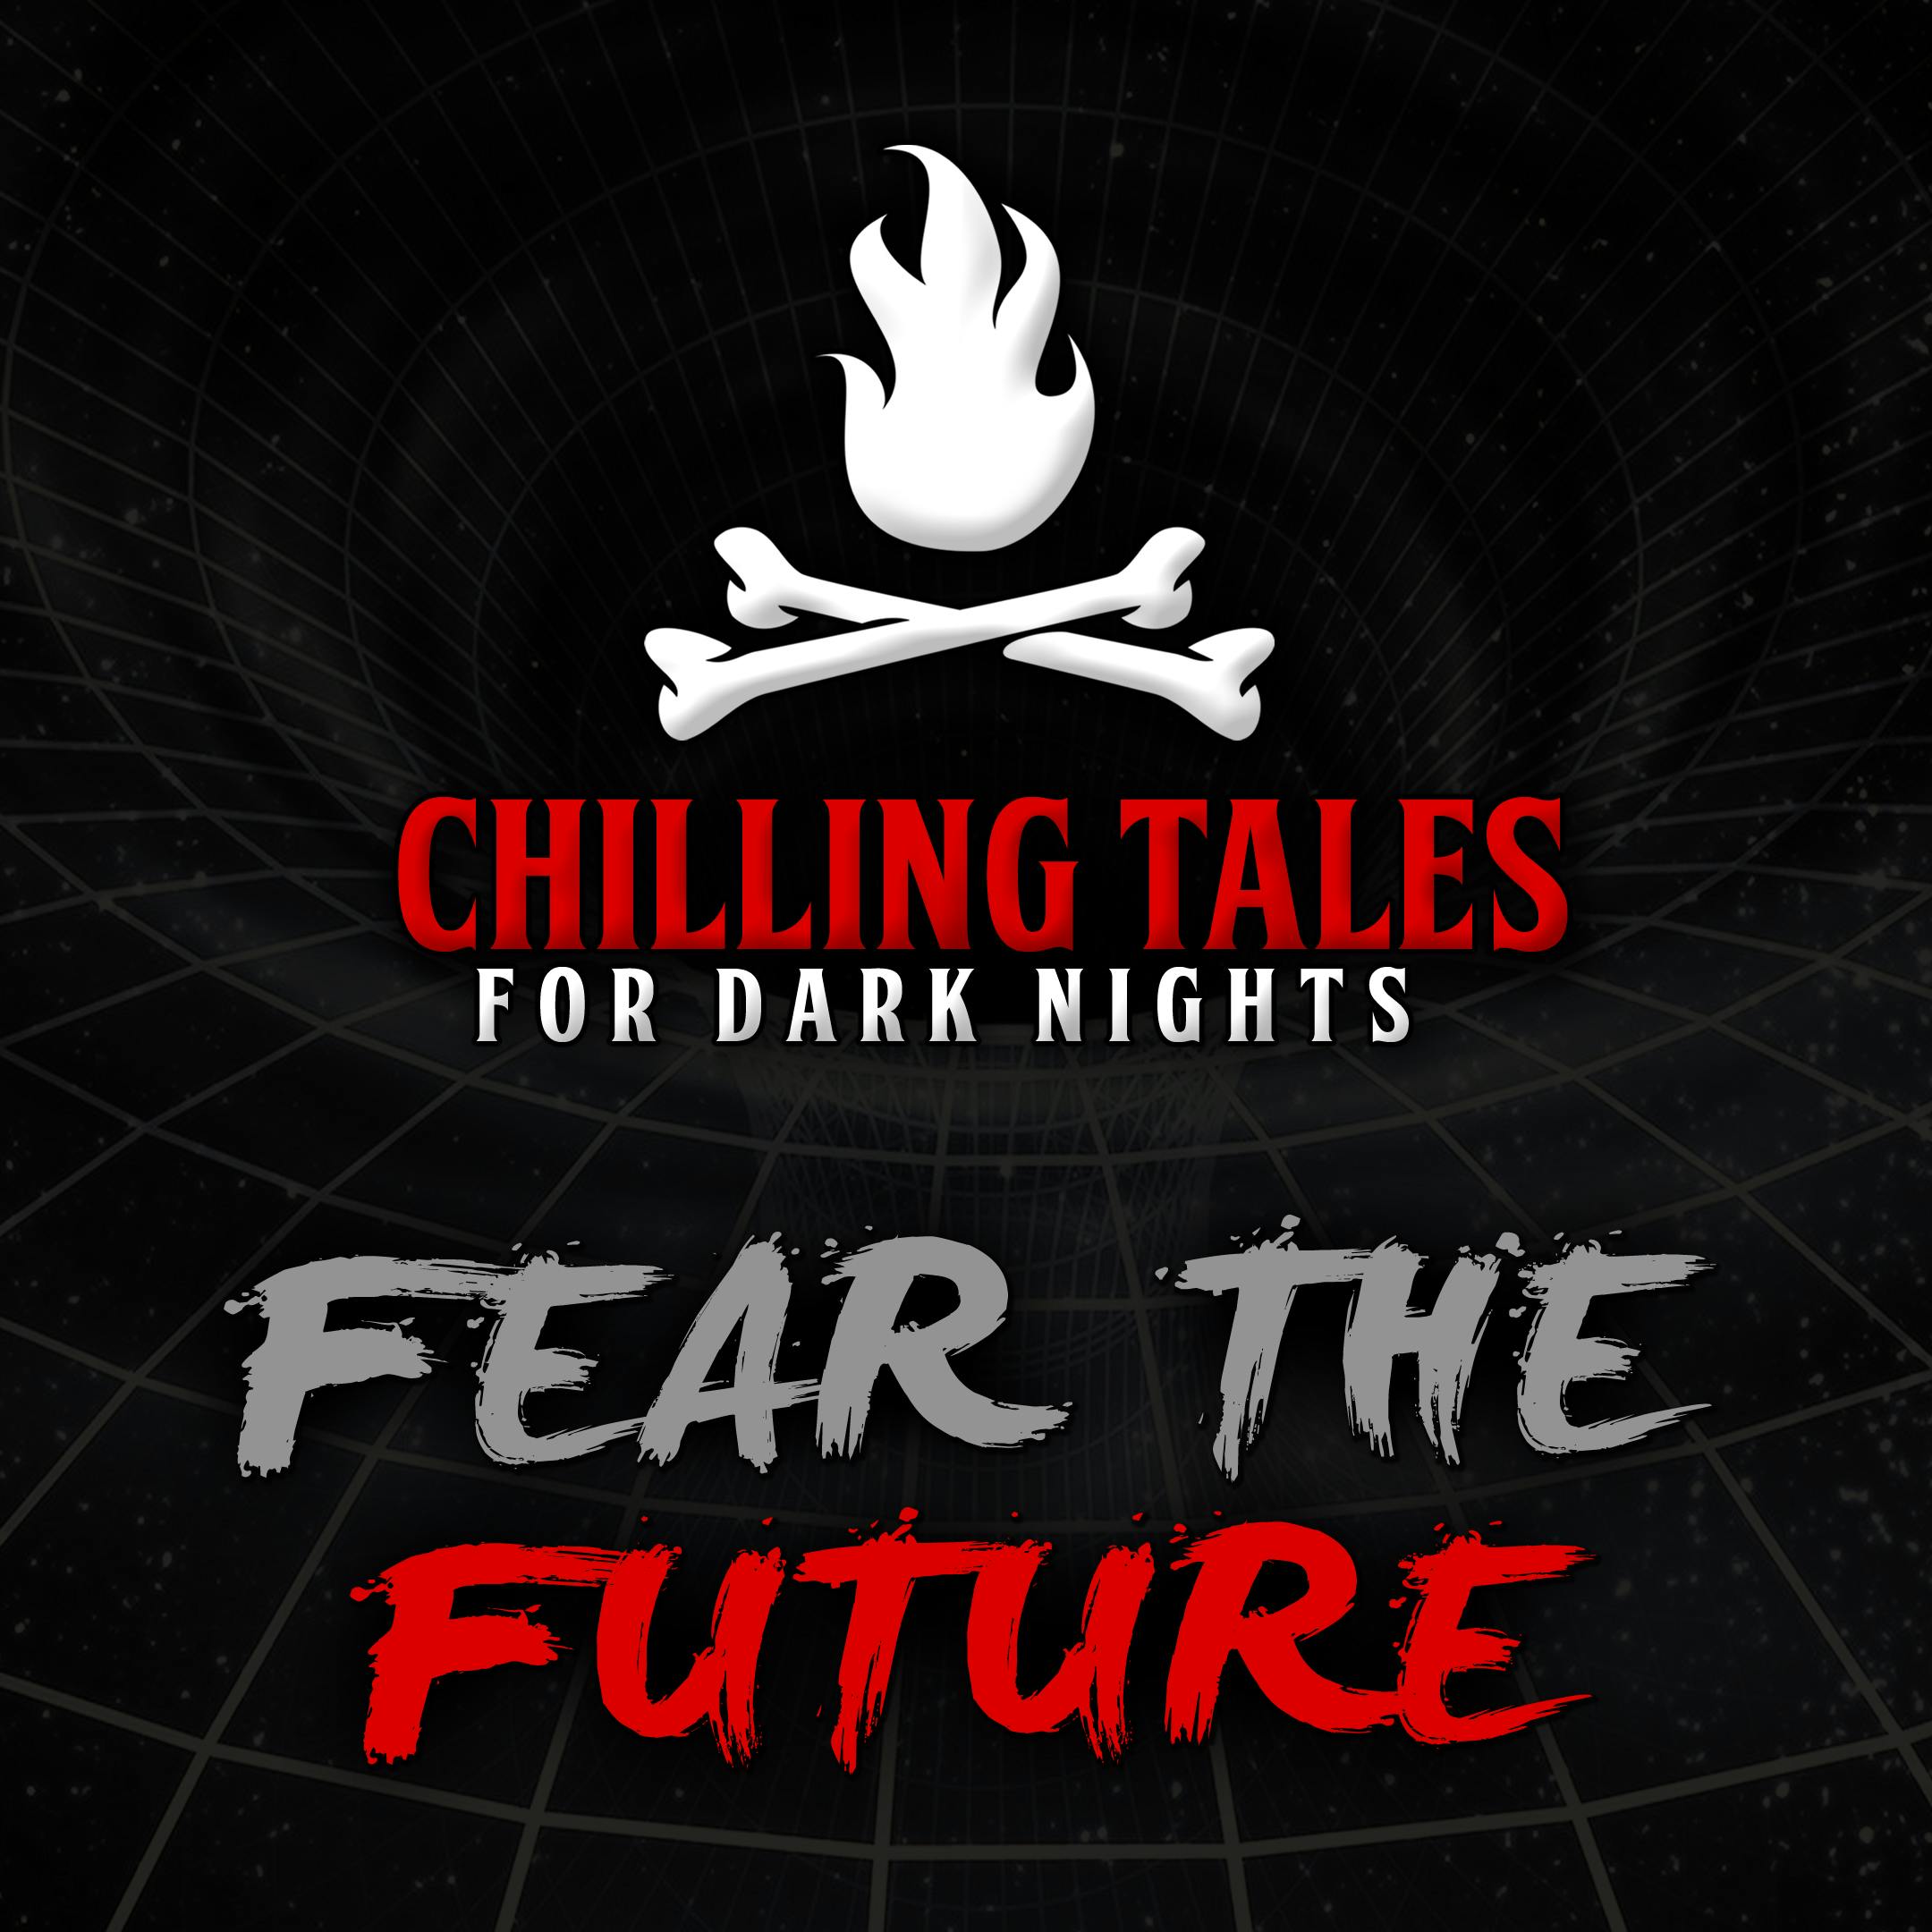 88: Fear the Future – Chilling Tales for Dark Nights